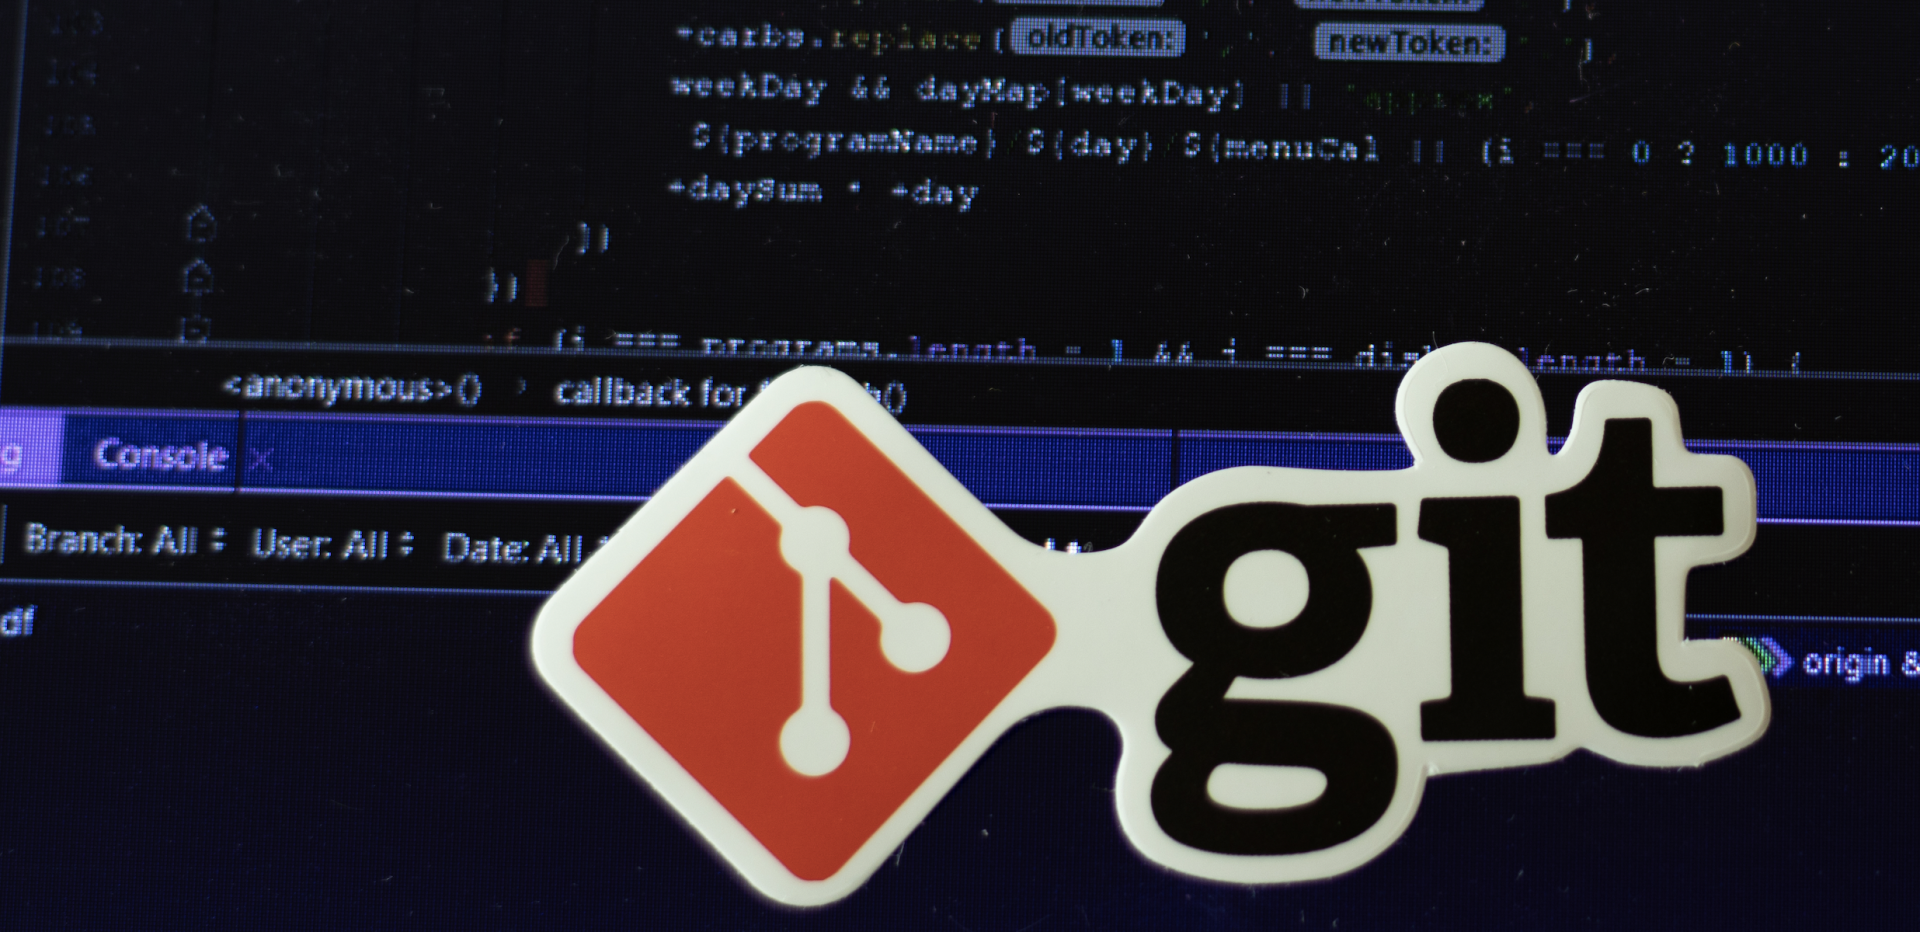 What Is “GitOps” and Why Does It Topic?